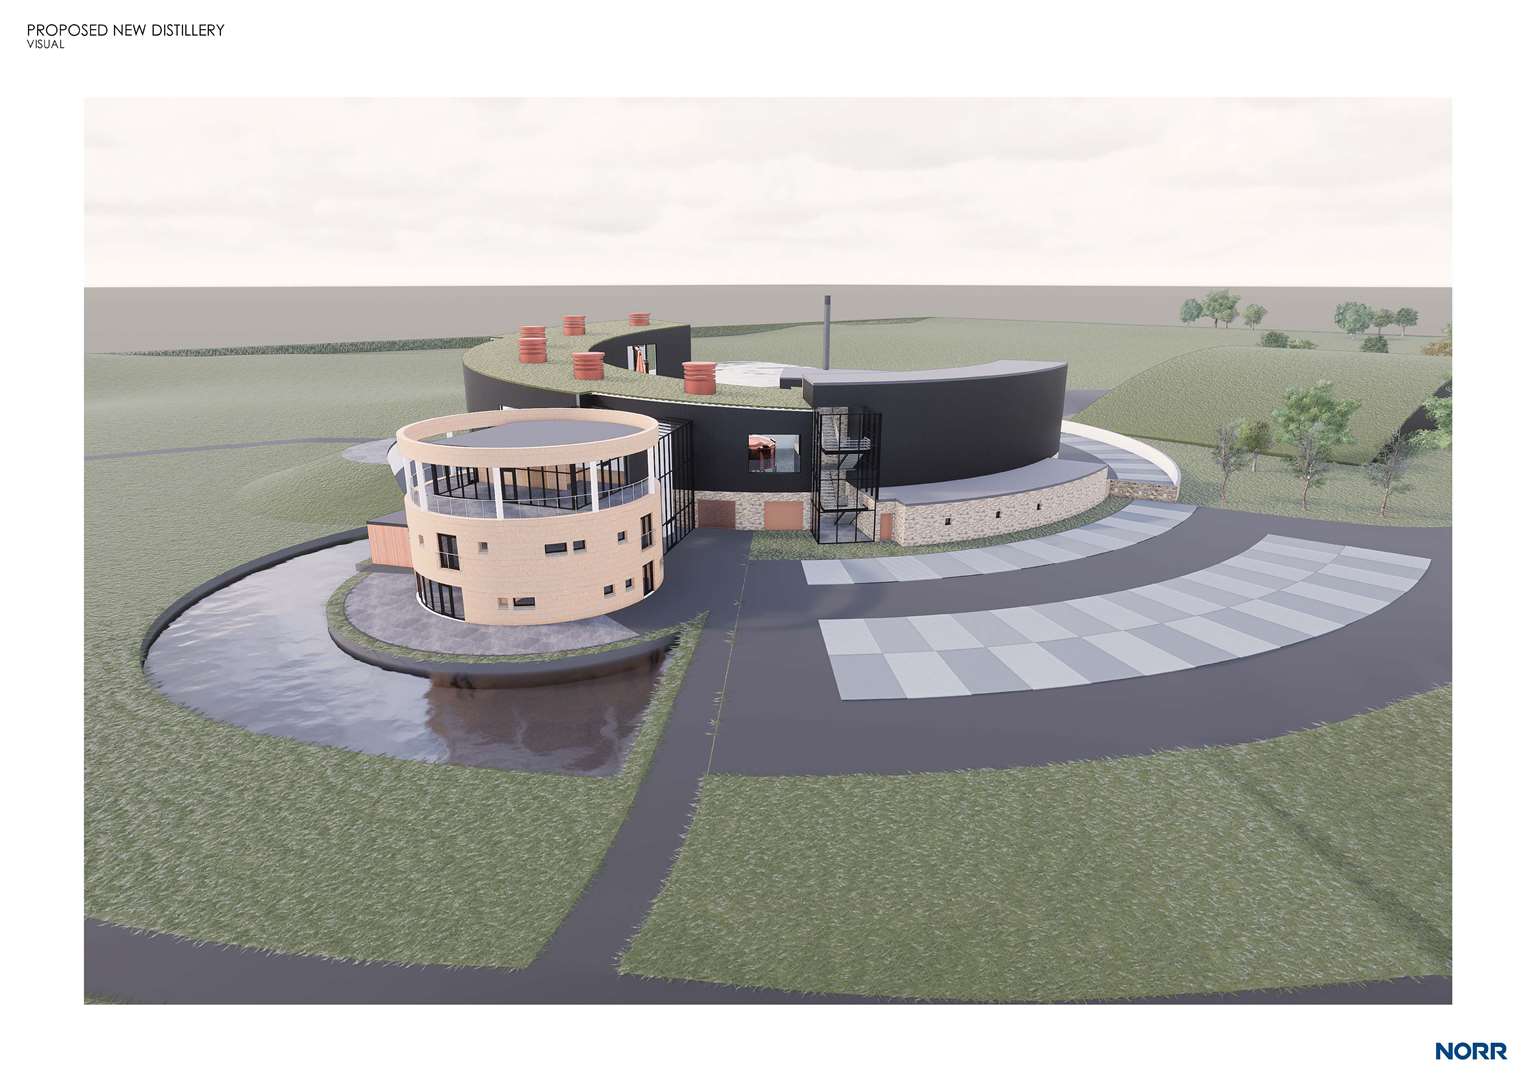 An image of the proposed new whiksy distillery at Craggan.